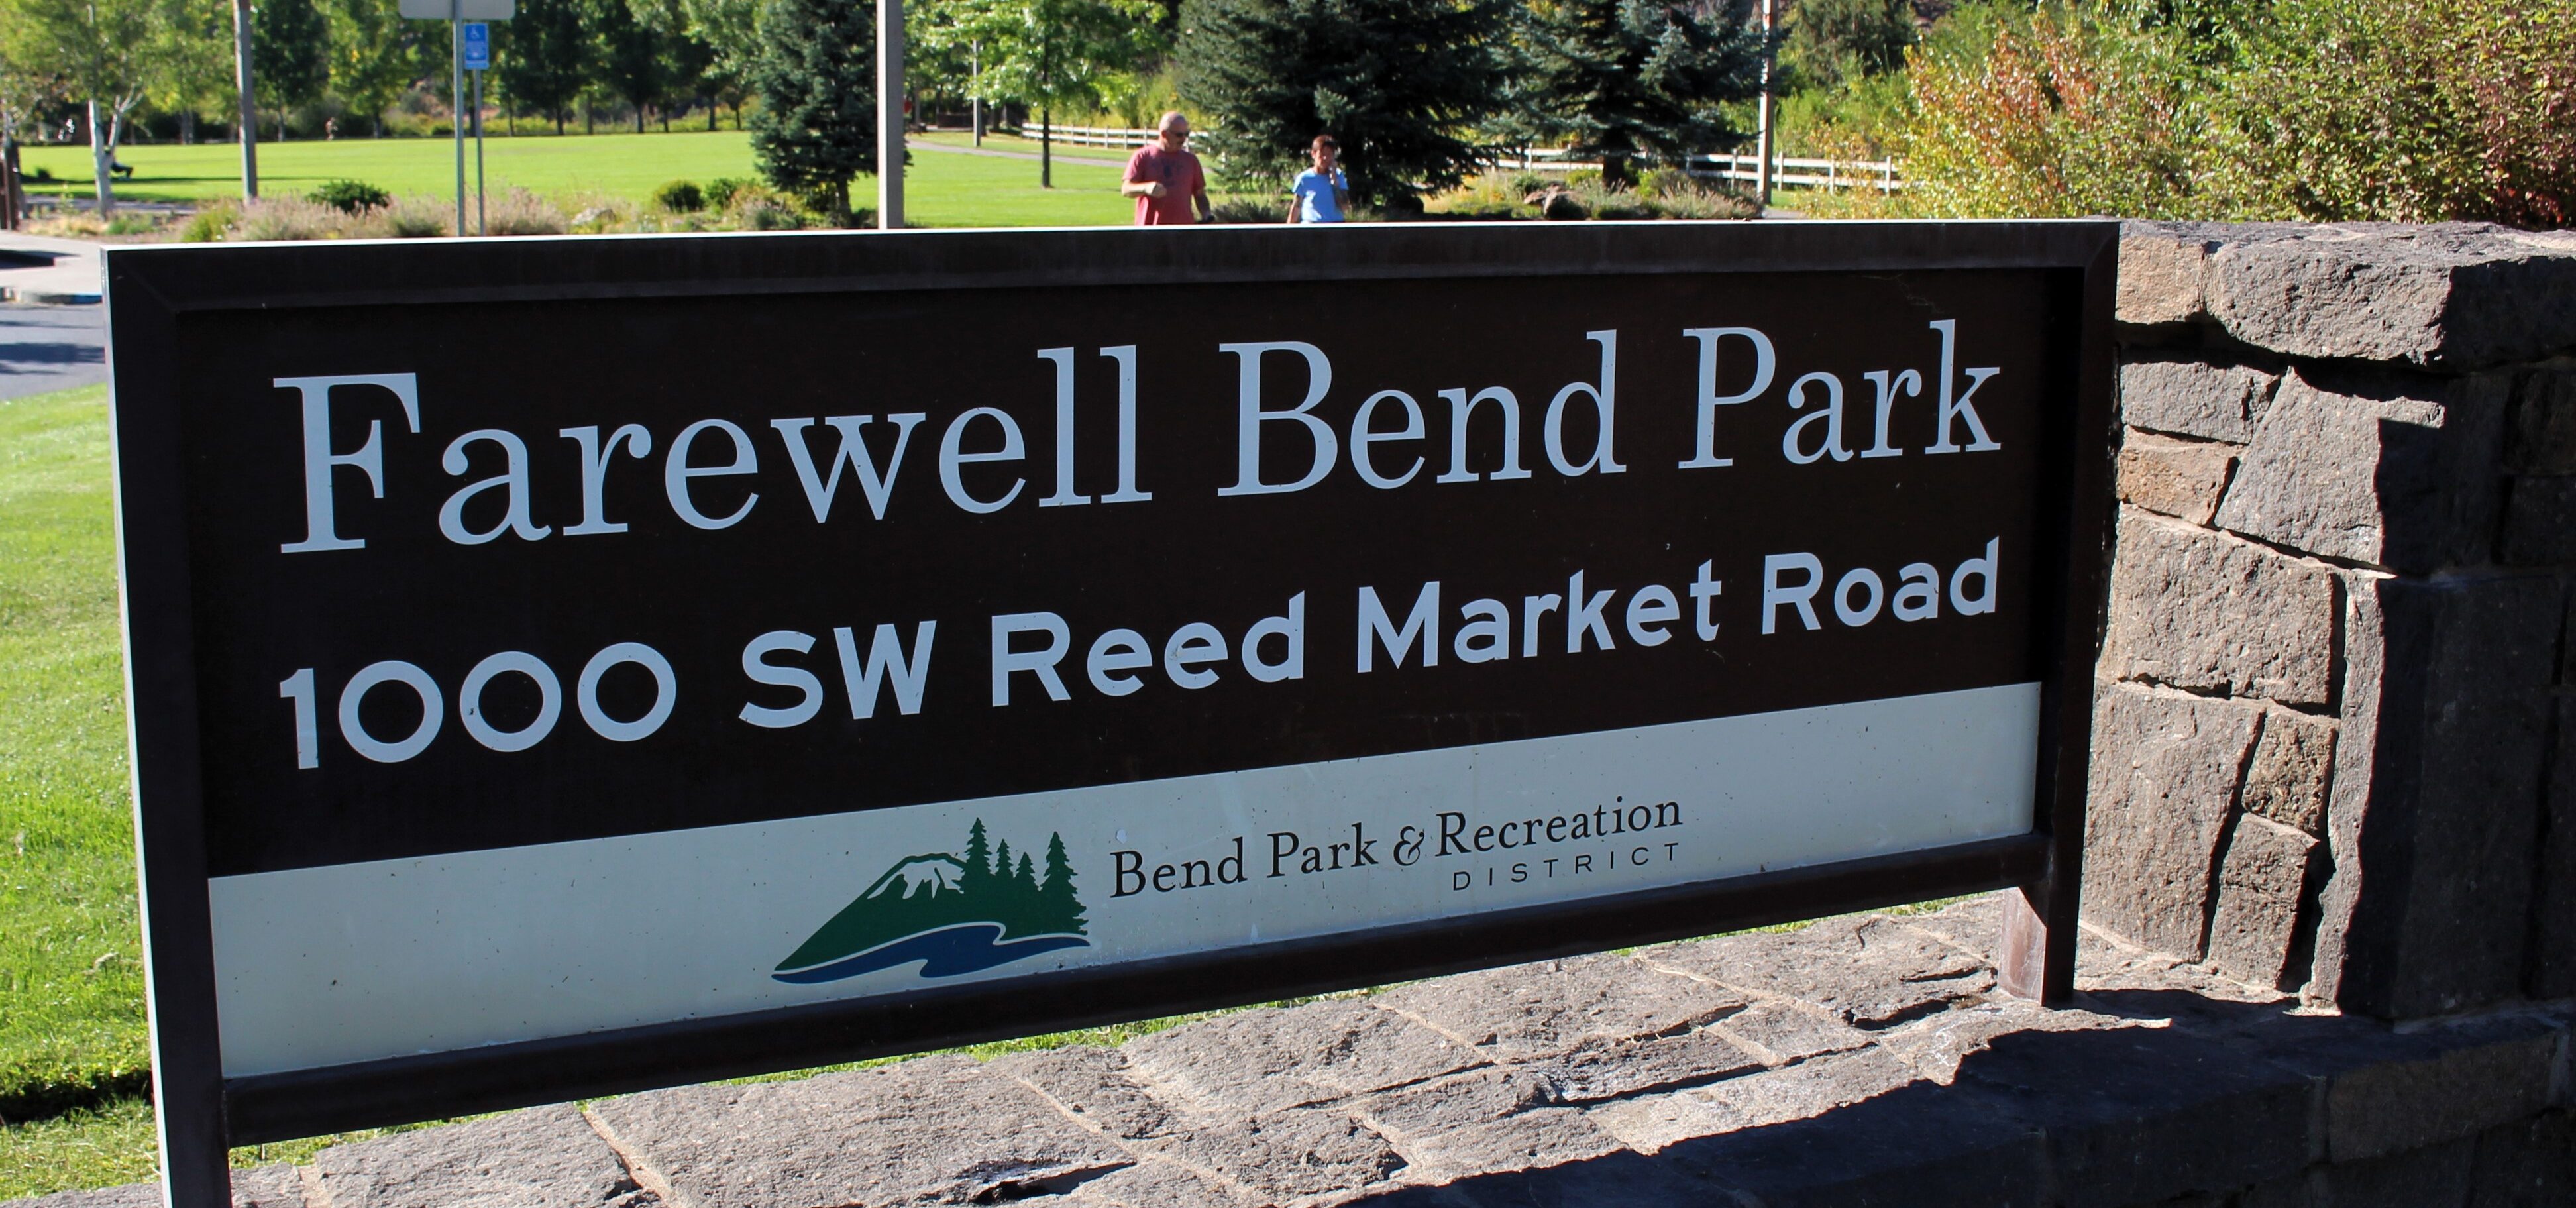 the entrance sign at farewell bend park